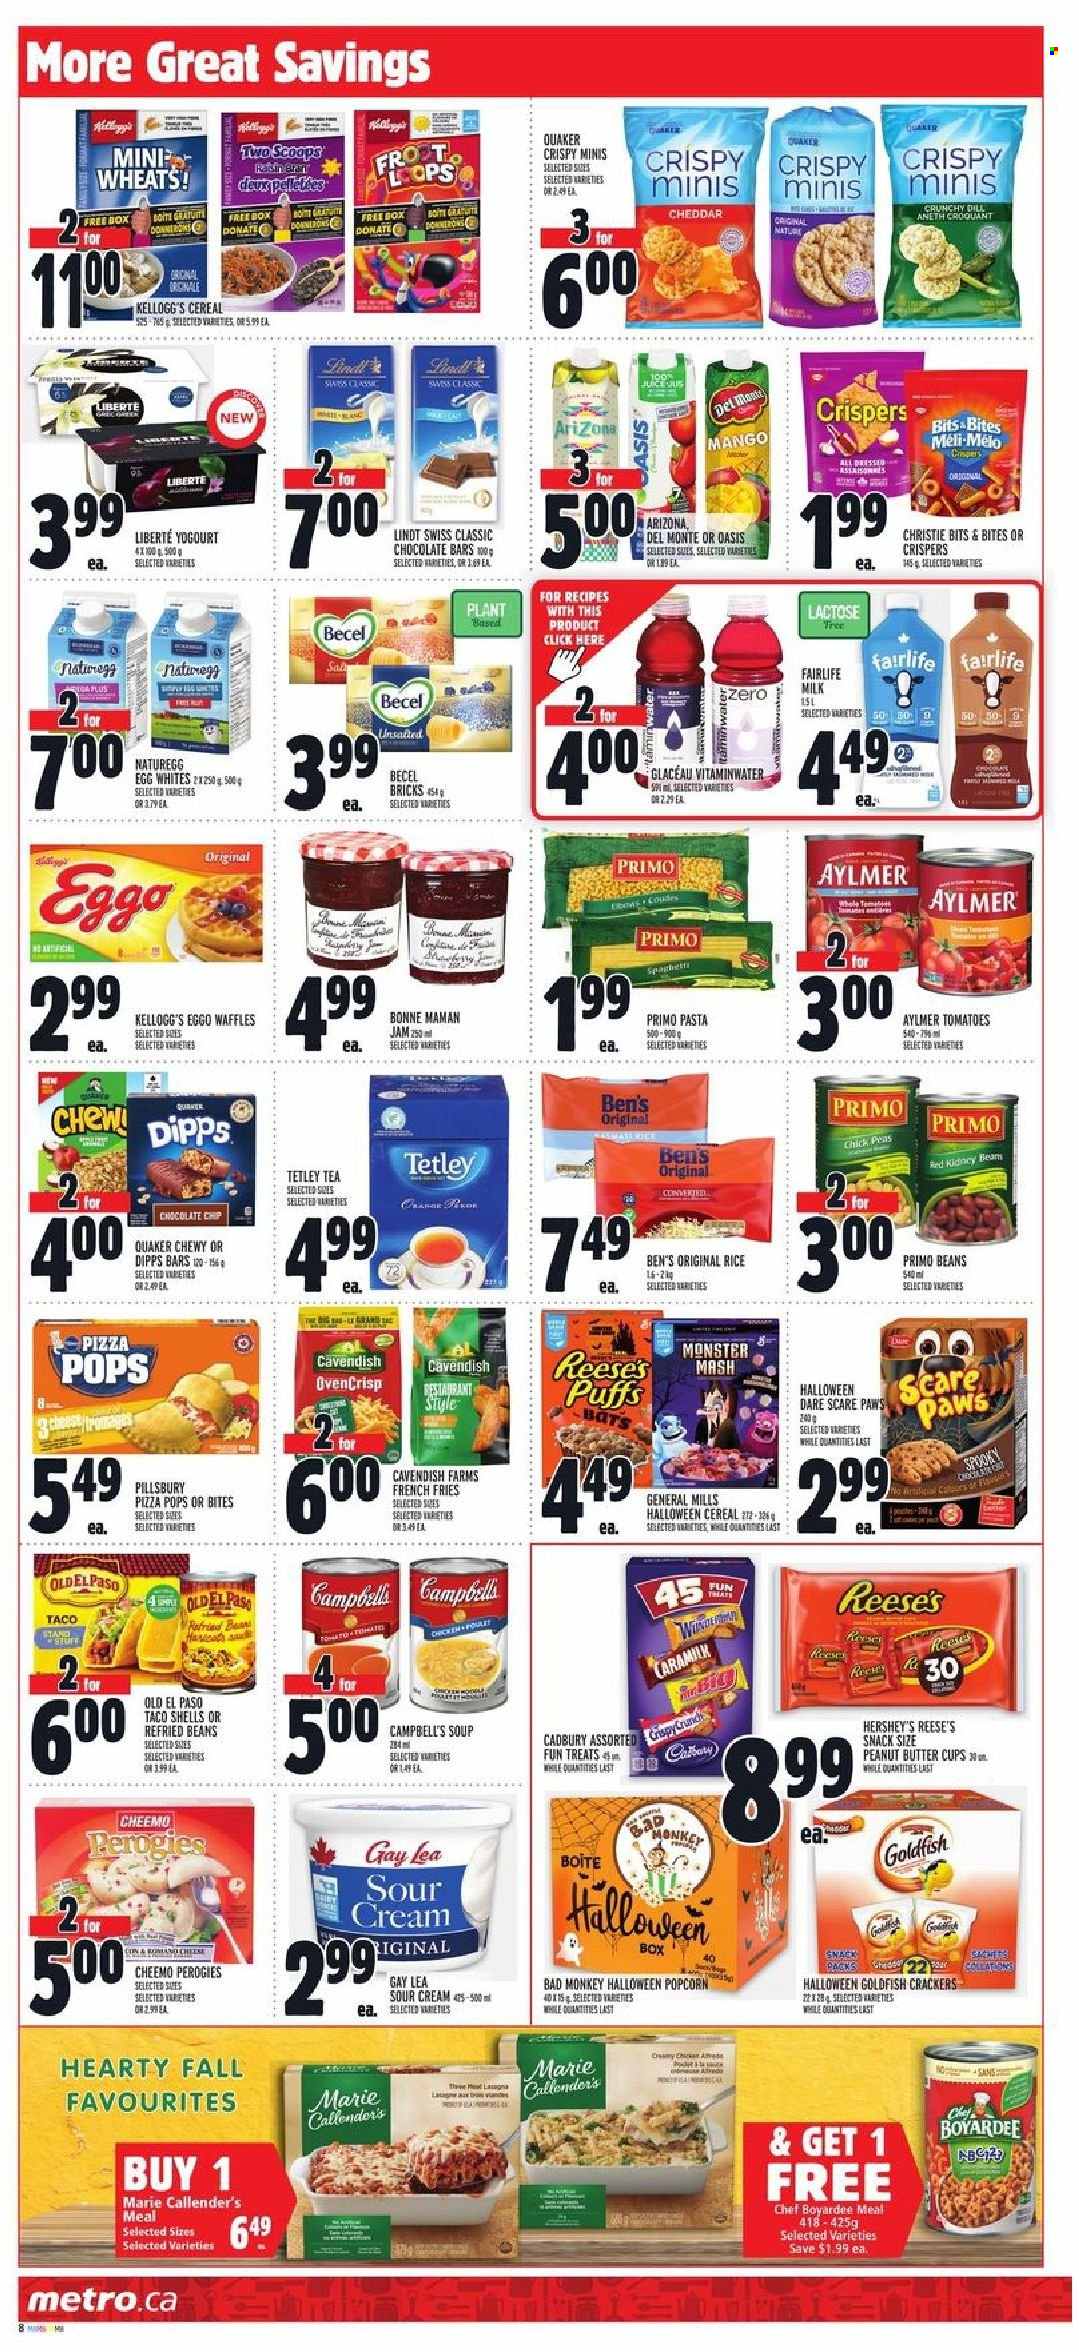 thumbnail - Metro Flyer - September 30, 2021 - October 06, 2021 - Sales products - Old El Paso, puffs, waffles, beans, peas, mango, Campbell's, pizza, soup, pasta, Pillsbury, Quaker, Marie Callender's, milk, eggs, sour cream, Reese's, Hershey's, potato fries, french fries, chocolate chips, snack, crackers, Kellogg's, Cadbury, peanut butter cups, chocolate bar, popcorn, Goldfish, refried beans, Chef Boyardee, cereals, fruit jam, Monster, AriZona, tea, Paws, Lindt. Page 10.